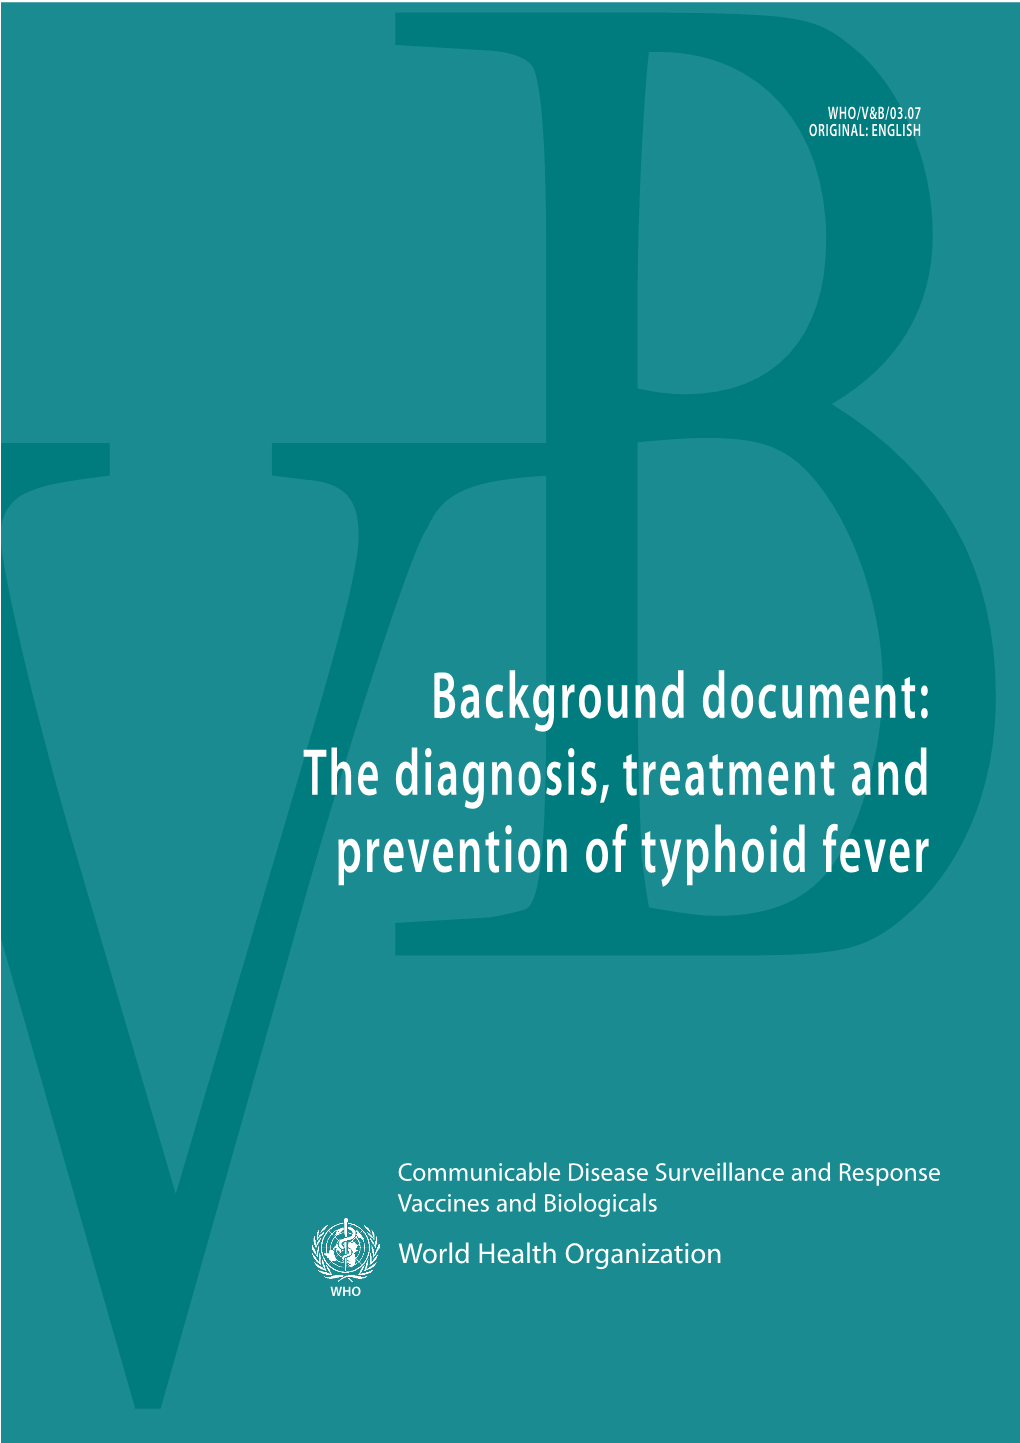 The Diagnosis, Treatment and Prevention of Typhoid Fever